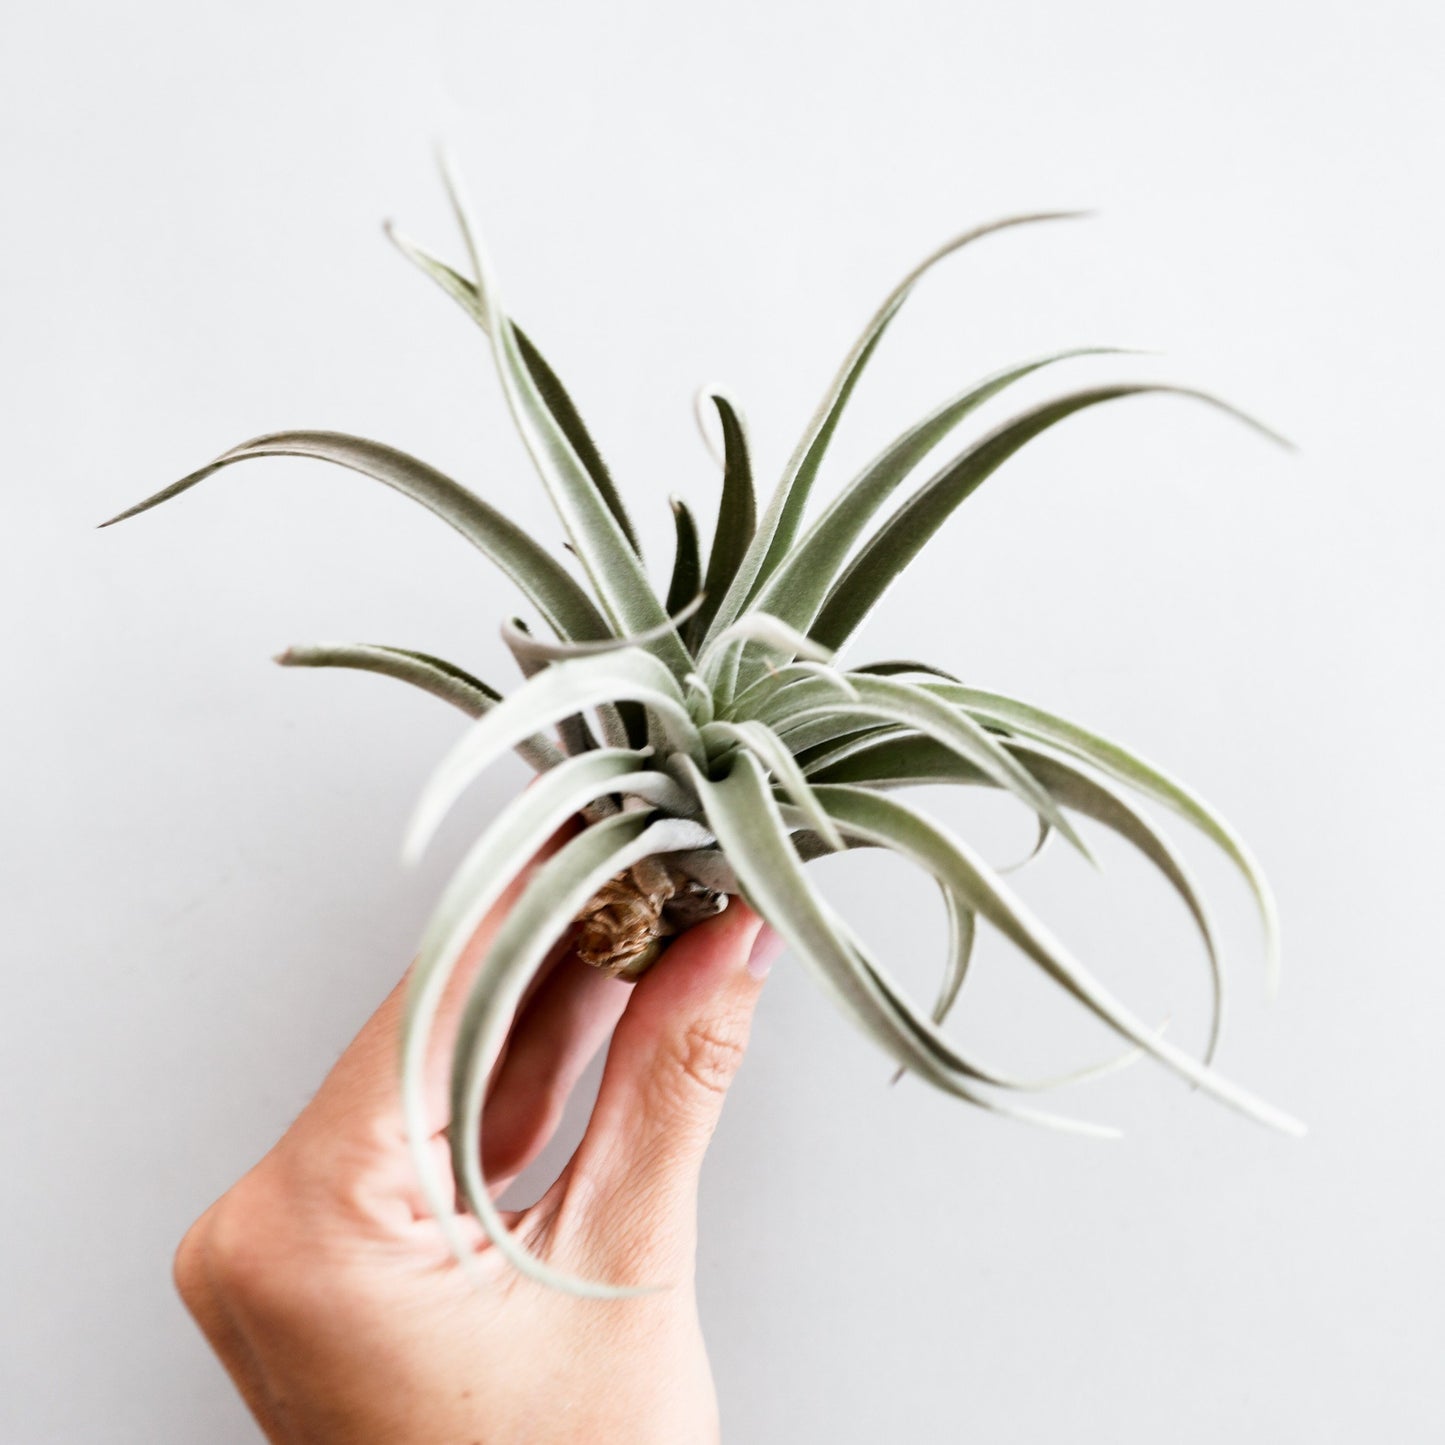 On a white background is a Tillandsia Harrisii.